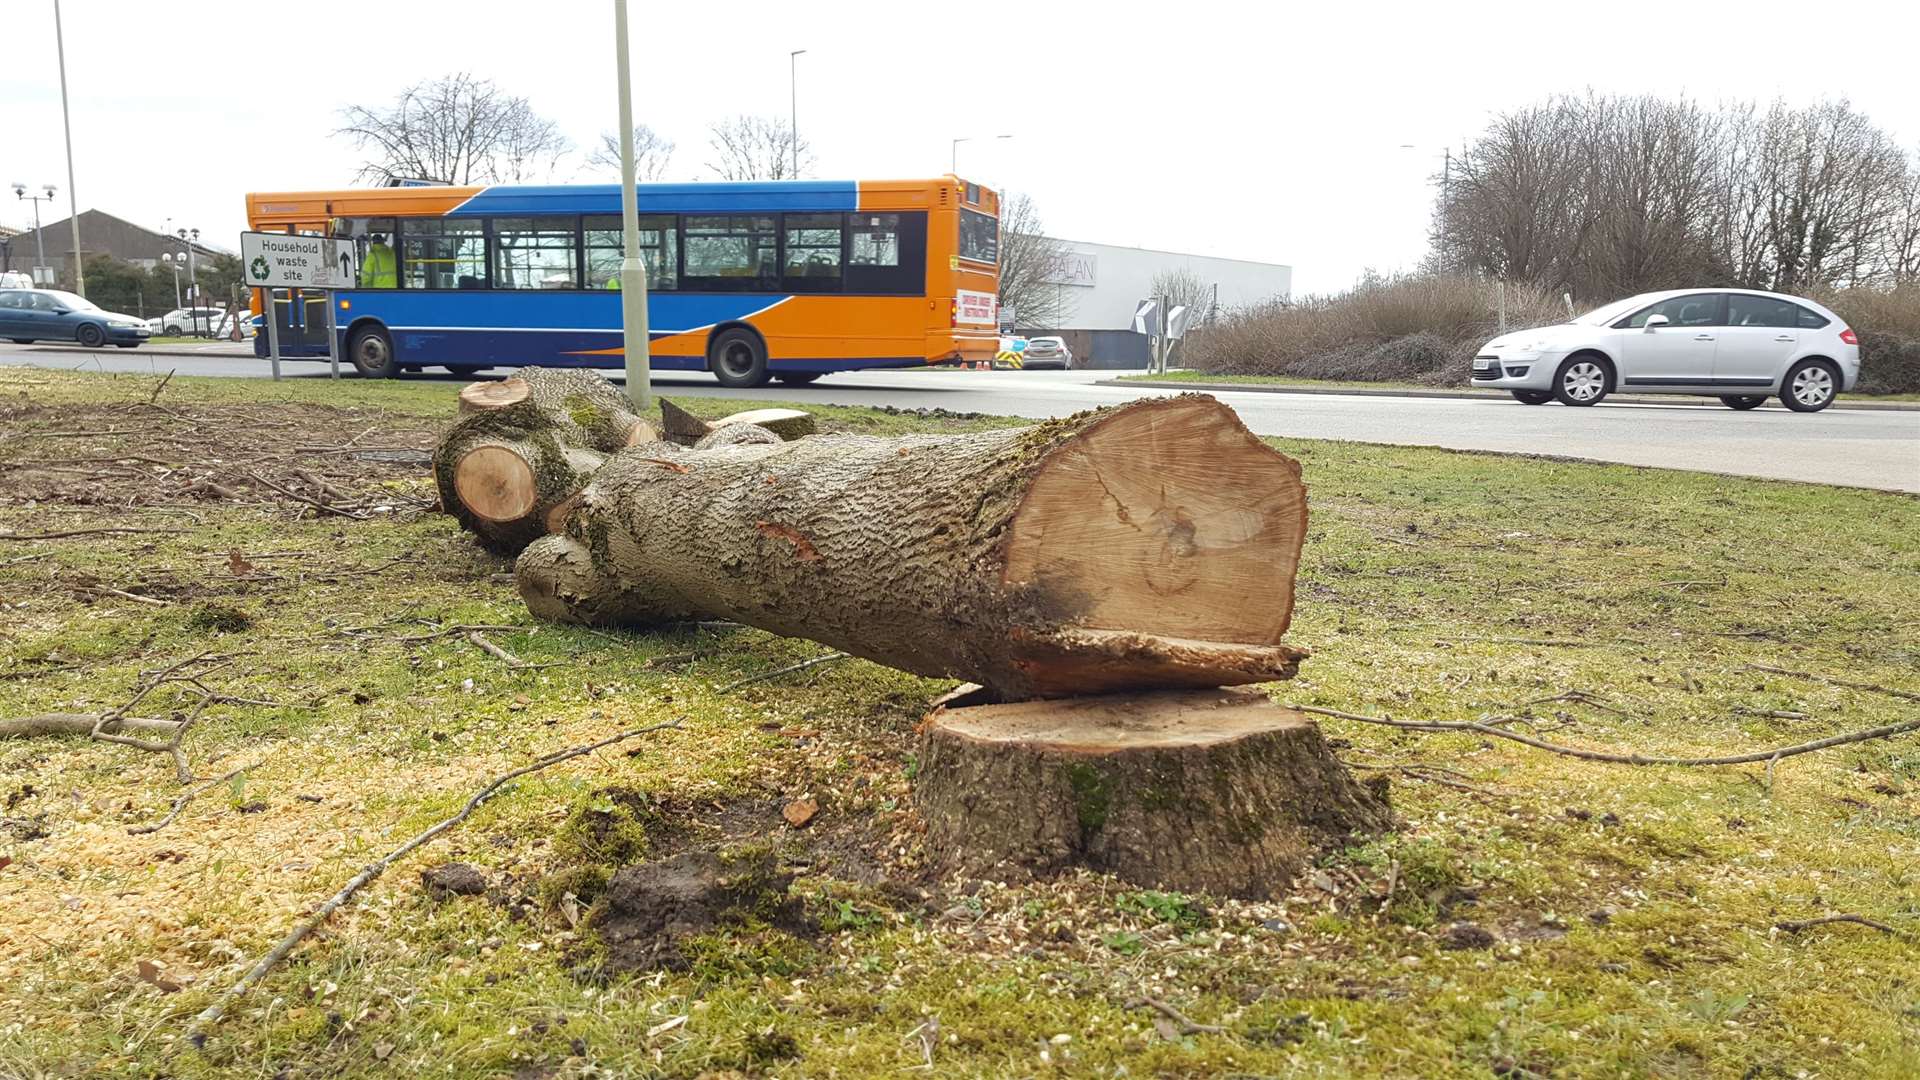 Trees were cut down along Chart Road in 2018 but work on the dual carriageway won't start until at least 2022